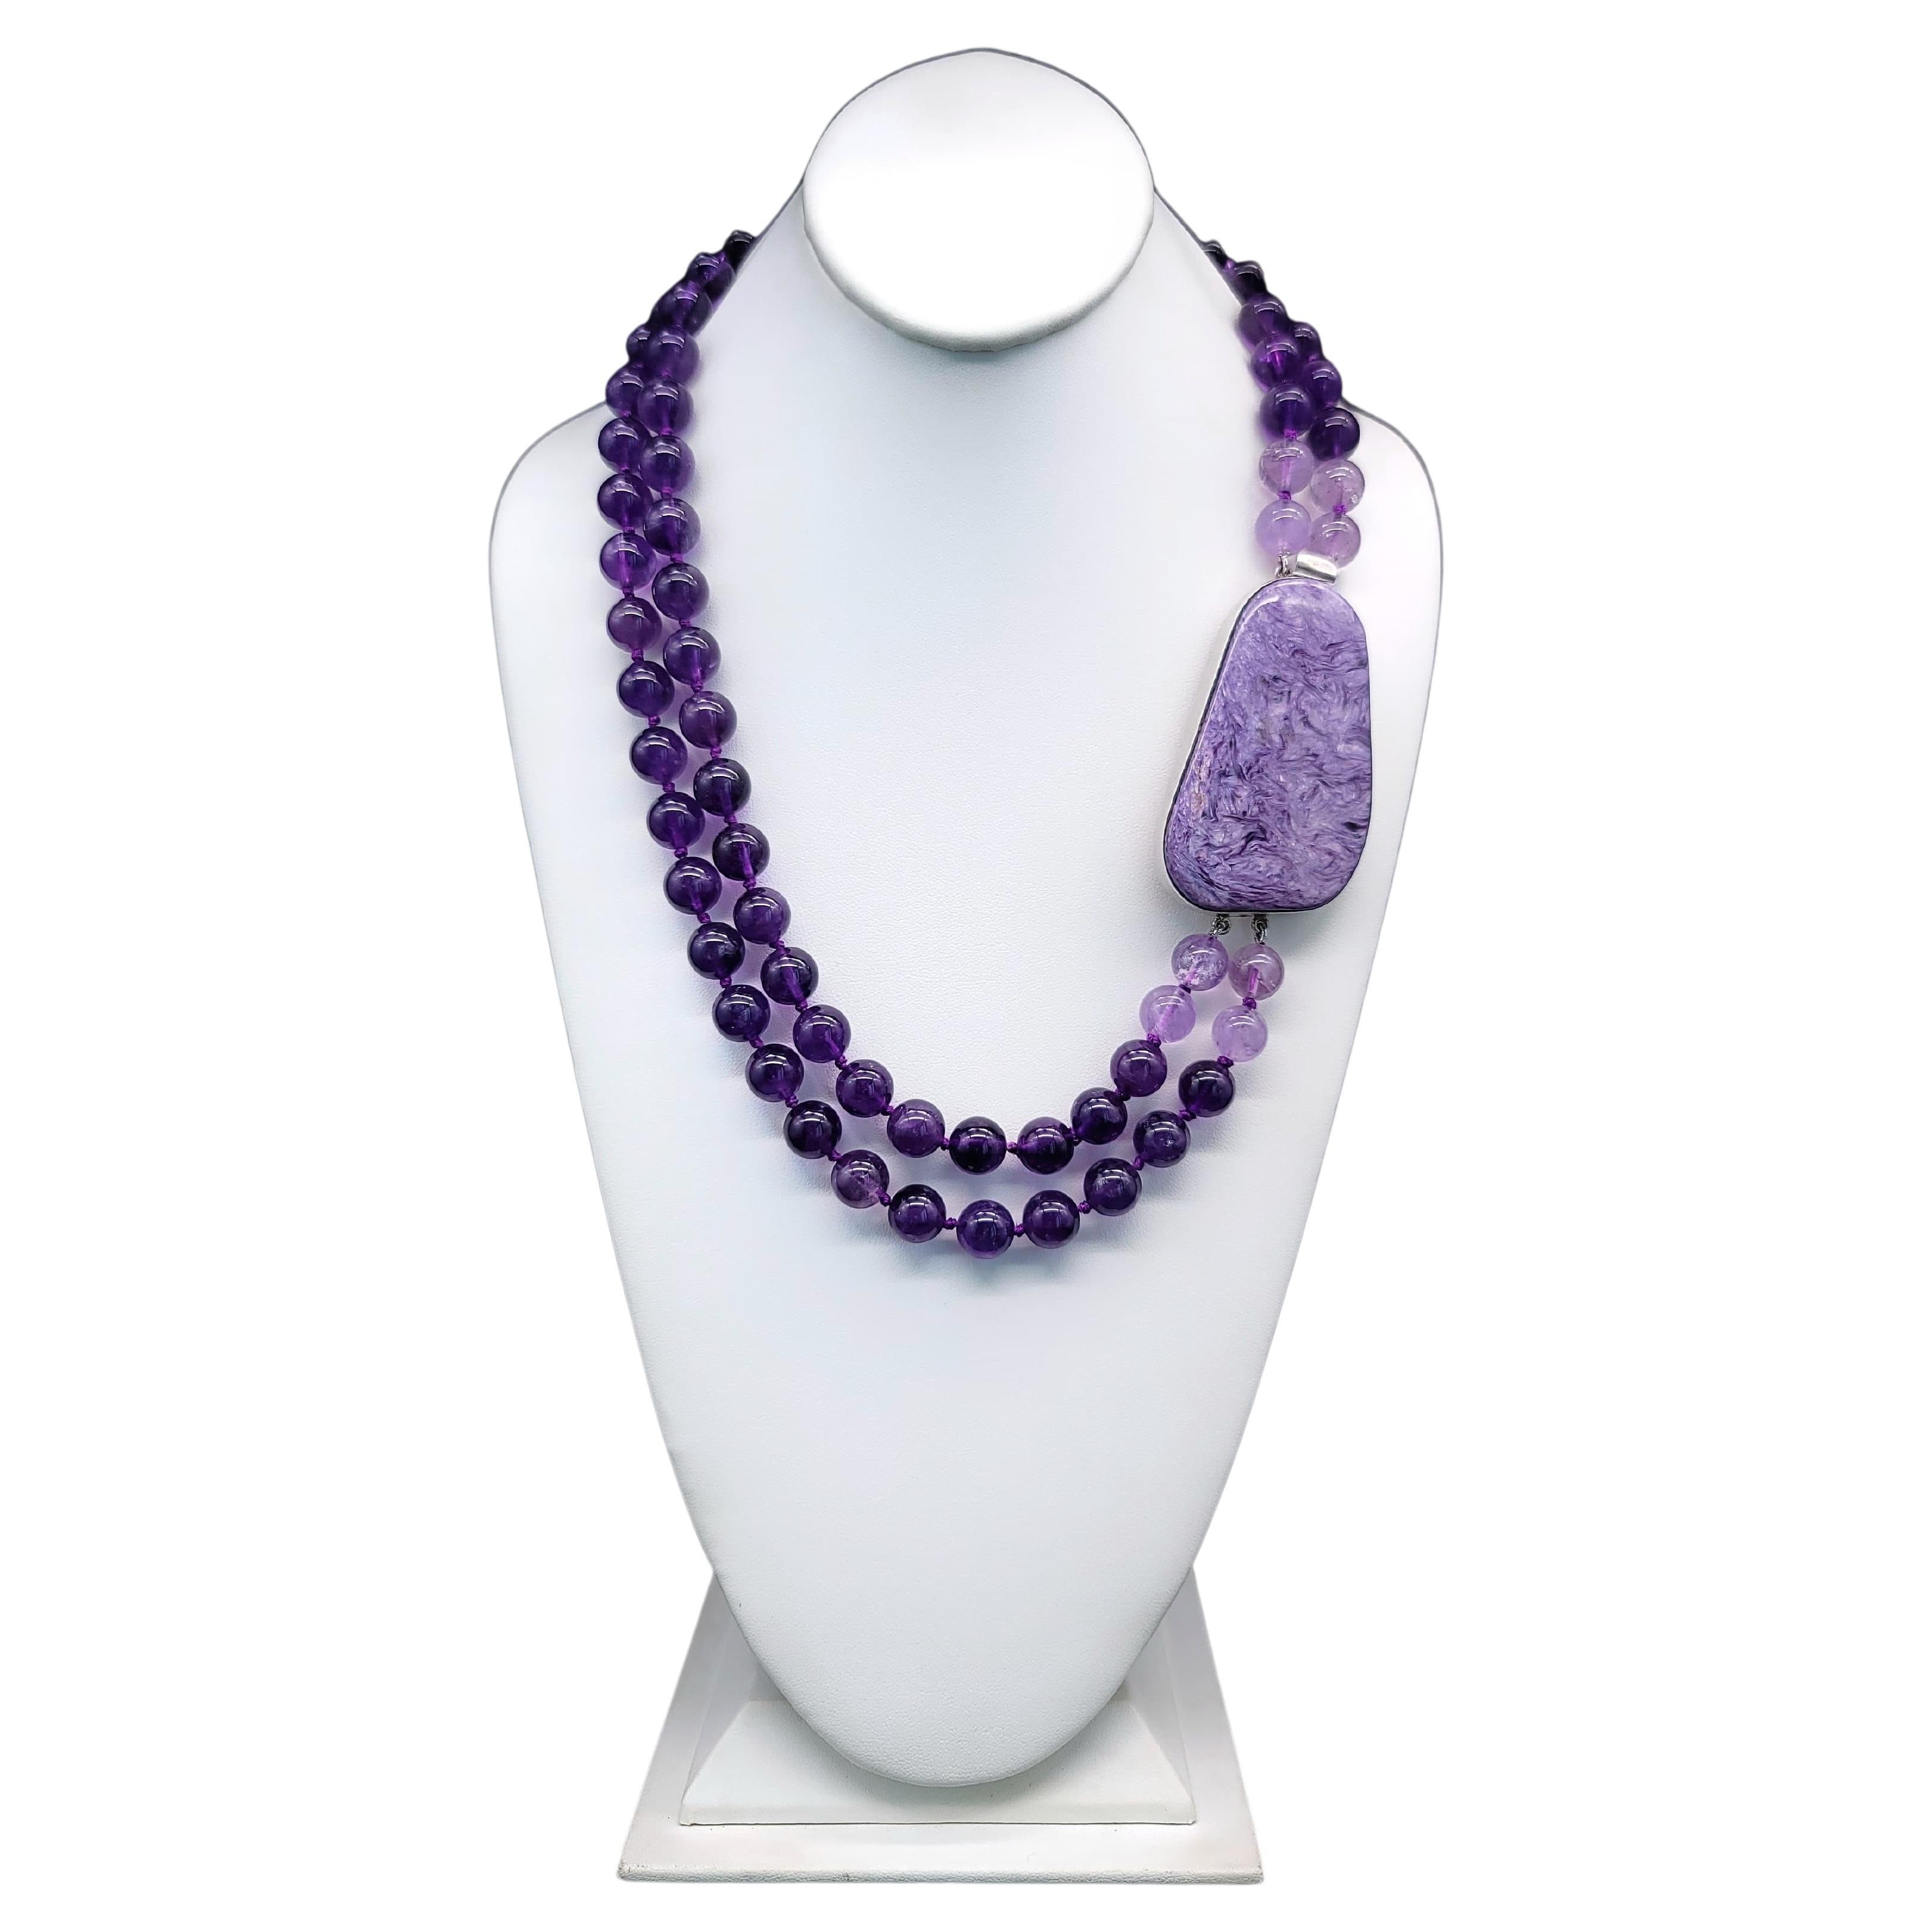 A.Jeschel 2 Strand Amethyst Necklace with a Spectacular Charoite Clasp.